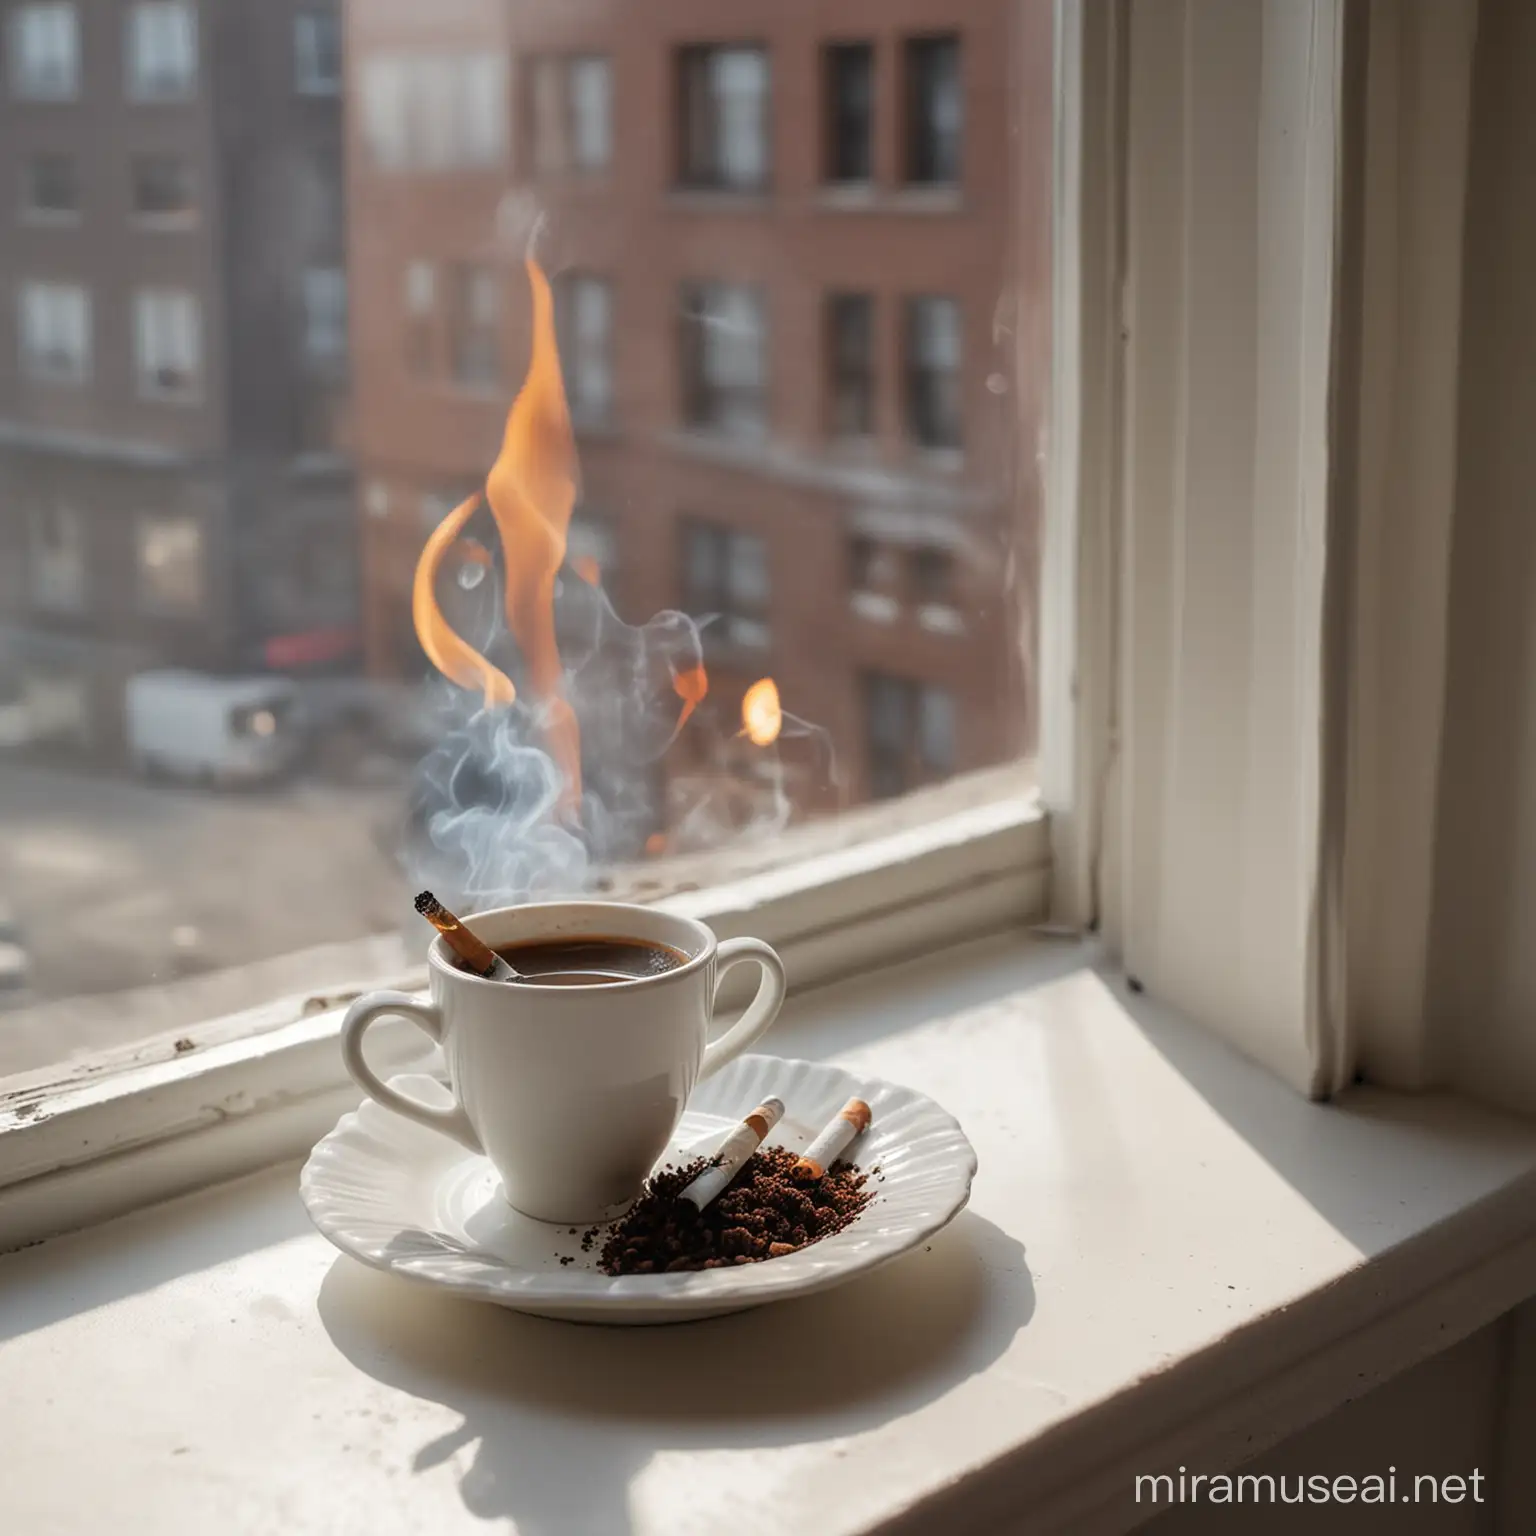 Quiet Morning Moment with Coffee Cup and Cigarette on Windowsill